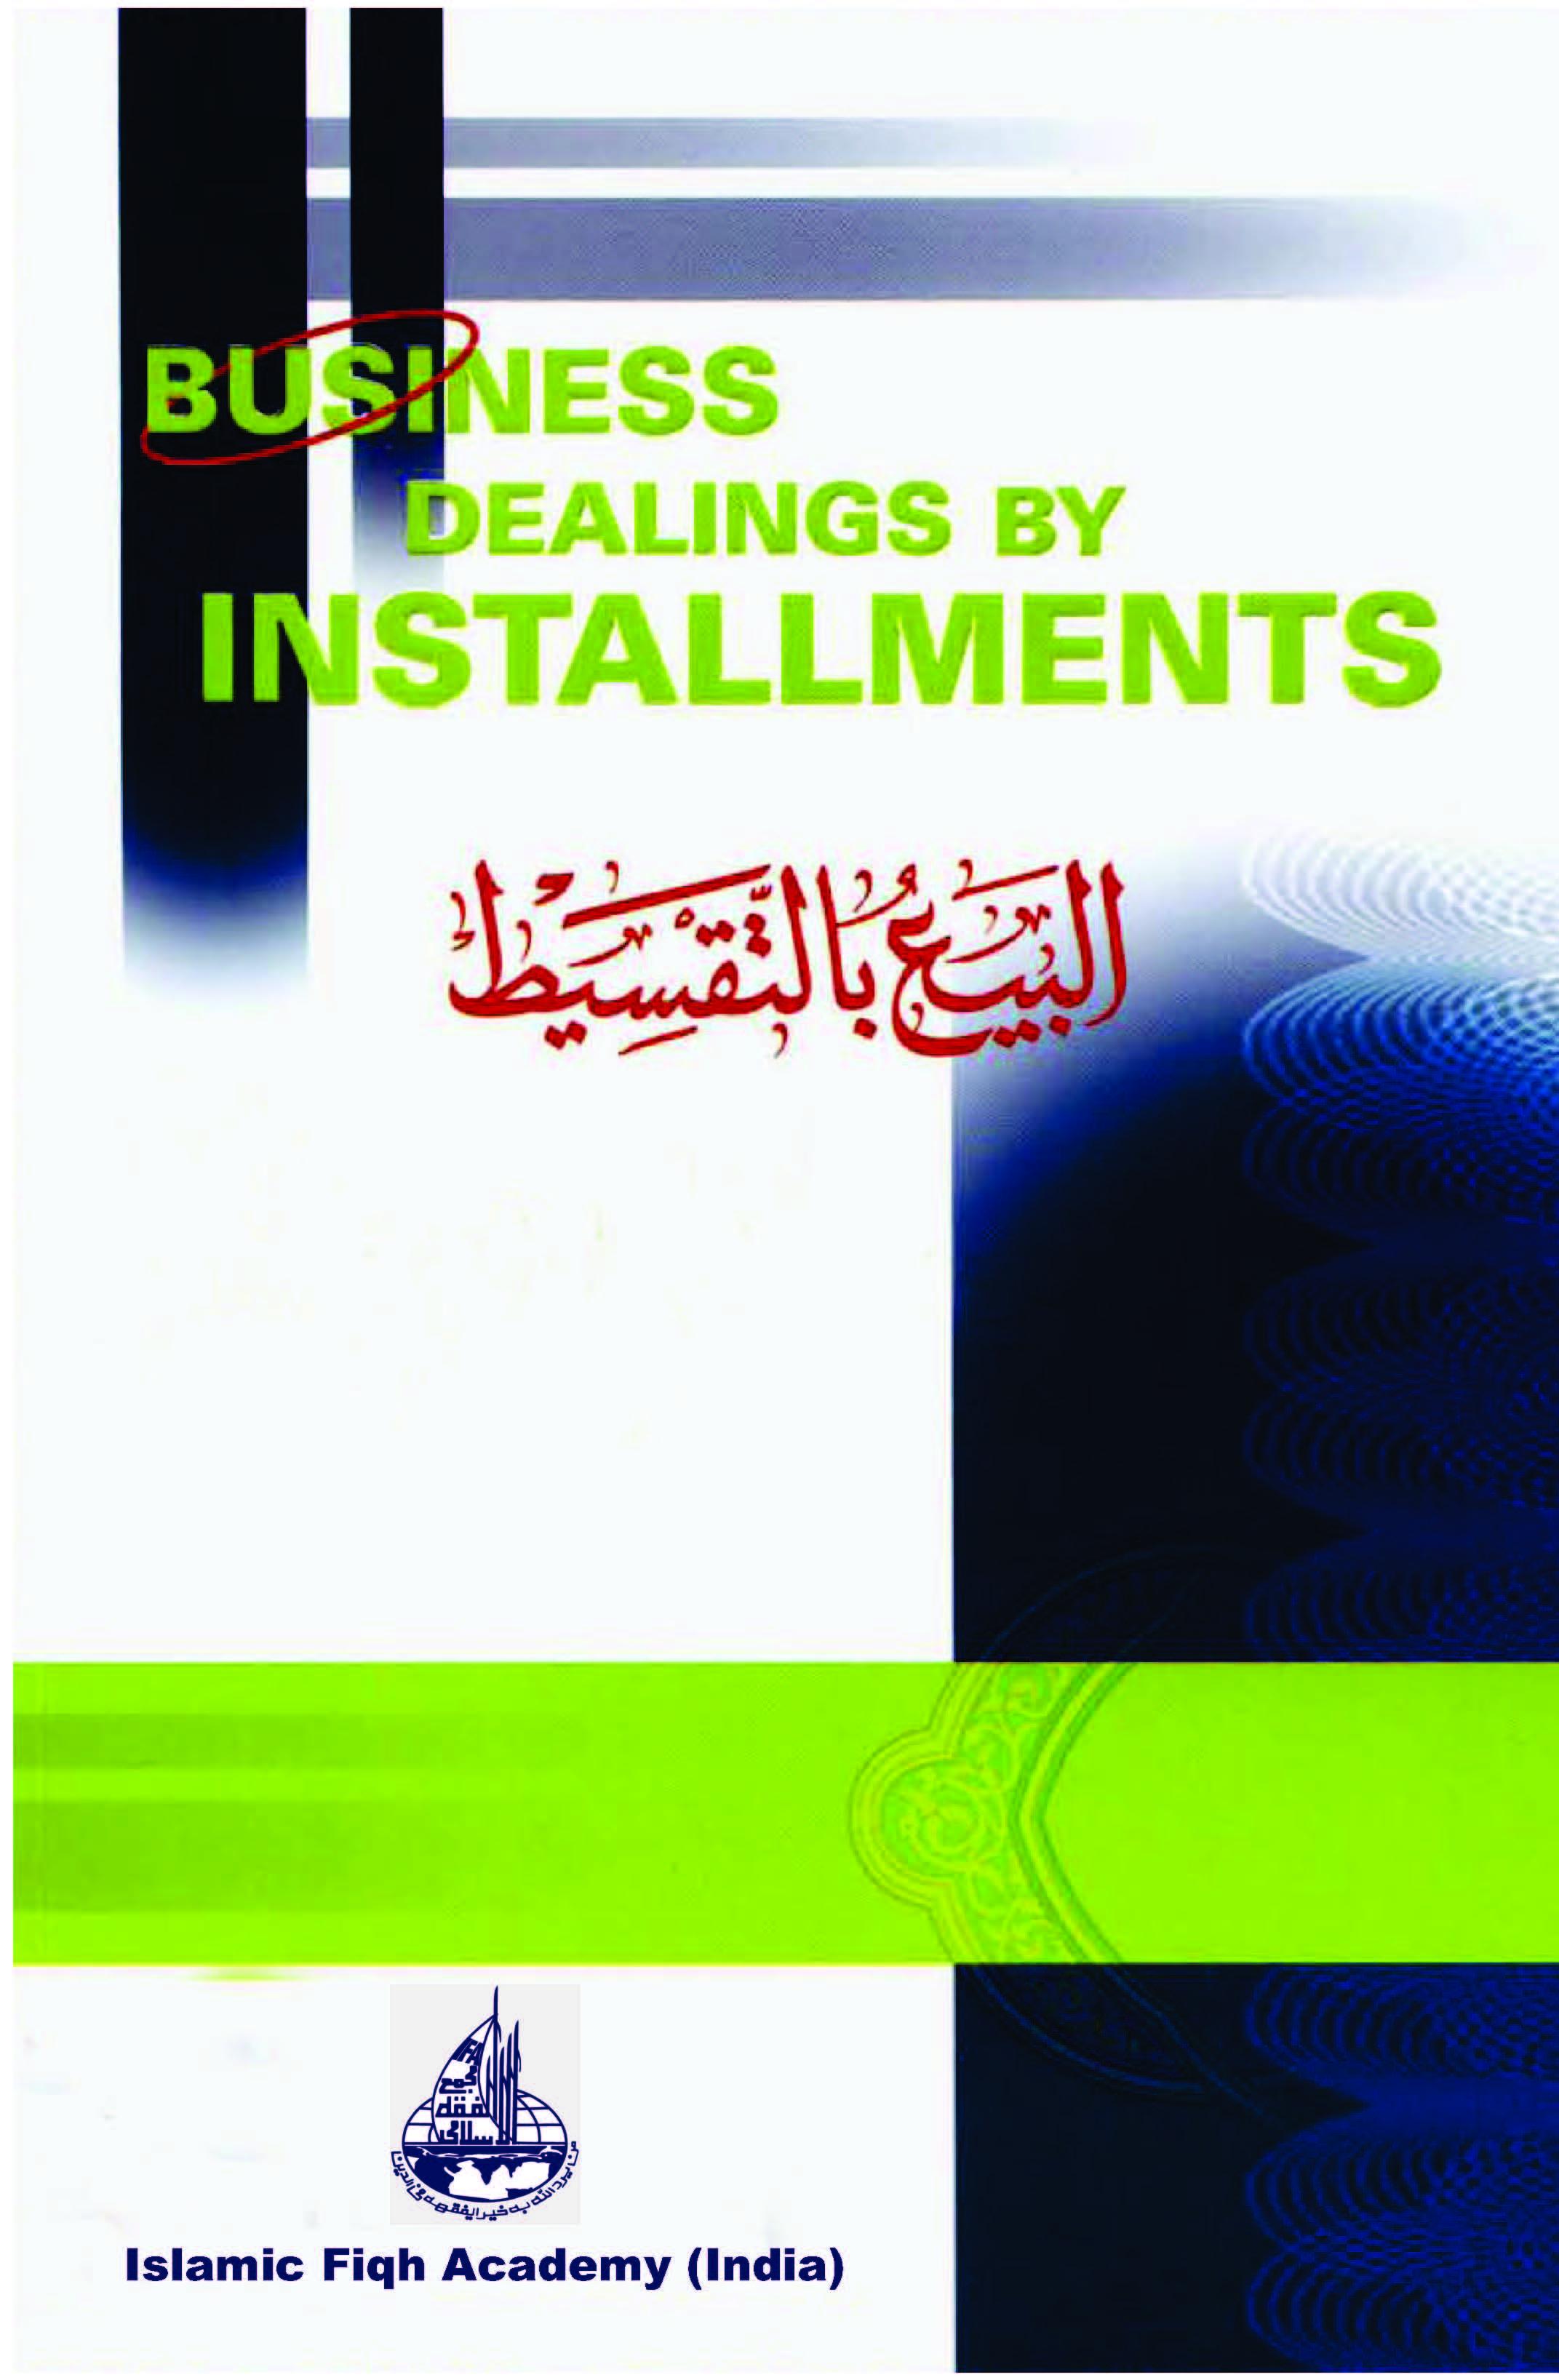 Business Dealings by Installments The Shariah Standpoint